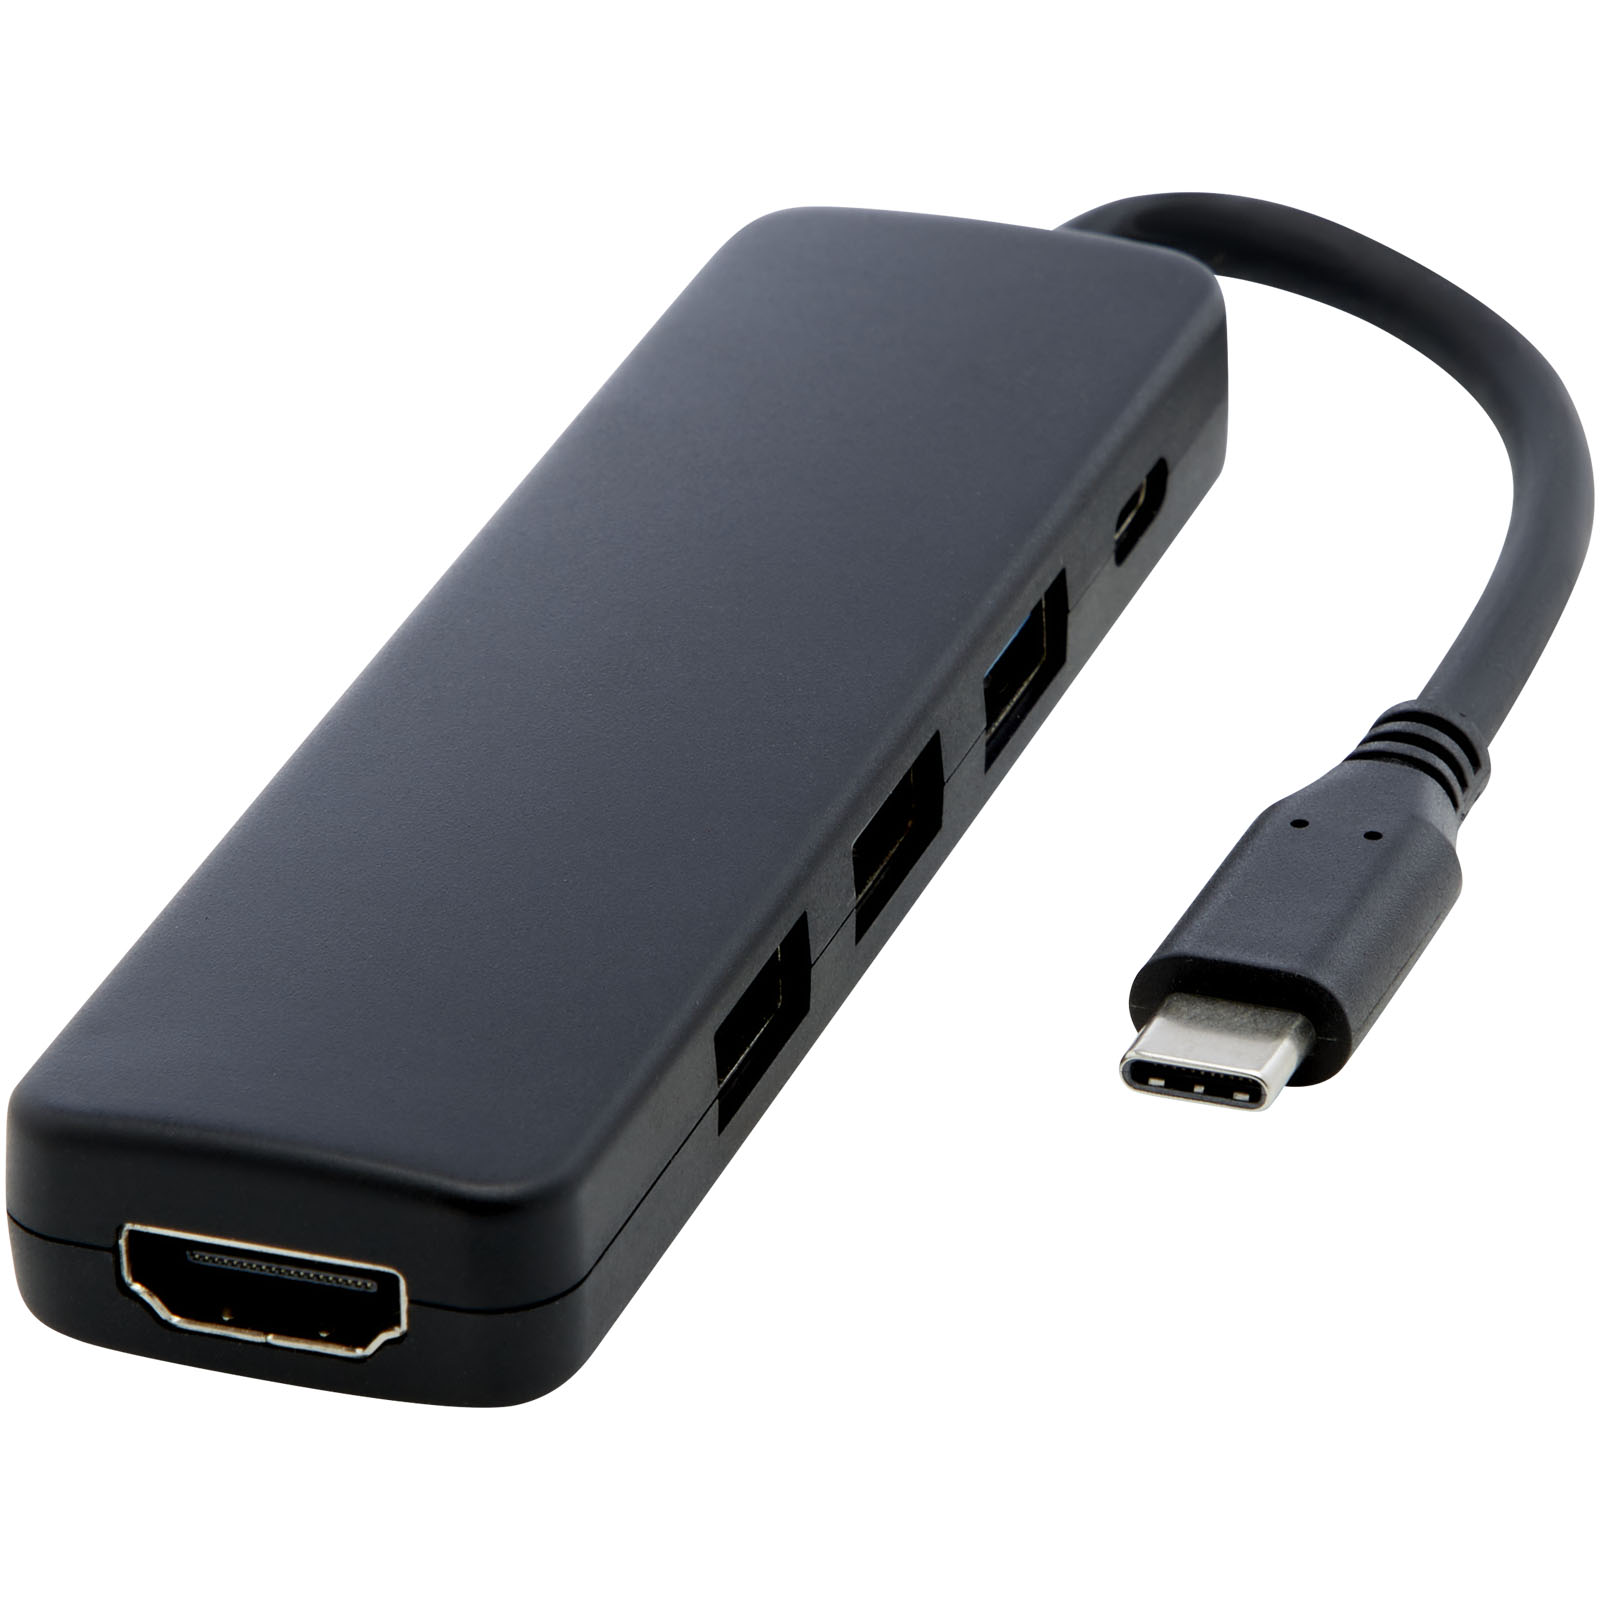 Technology - Loop RCS recycled plastic multimedia adapter USB 2.0-3.0 with HDMI port